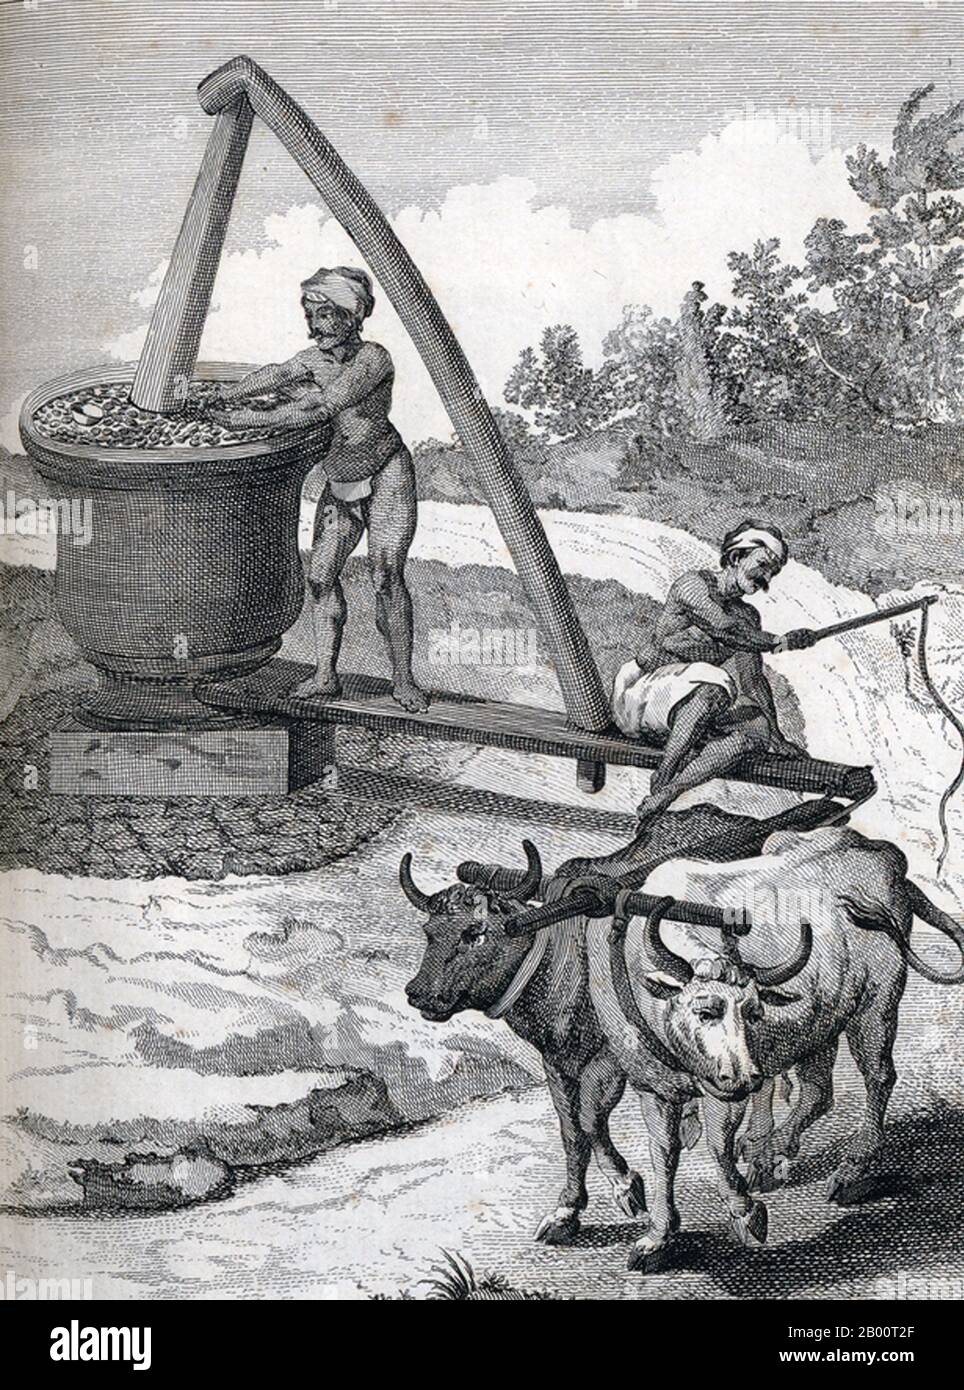 India/France: 'Milling Oil Seed by Ox'. Engraving by Pierre Sonnerat (1748-1814), 1782.  Pierre Sonnerat (1748-1814) was a French naturalist and explorer who made several voyages to Southeast Asia between 1769 and 1781. He published this two-volume account of his voyage in 1782.  Volume 1 deals exclusively with India, whose culture Sonnerat very much admired, and is especially noteworthy for its extended discussion of religion in India, Hinduism in particular. Volume 2 covers Sonnerat’s travels to China, Burma, Madagascar, the Maldives, Mauritius, Ceylon, Indonesia and the Philippines. Stock Photo